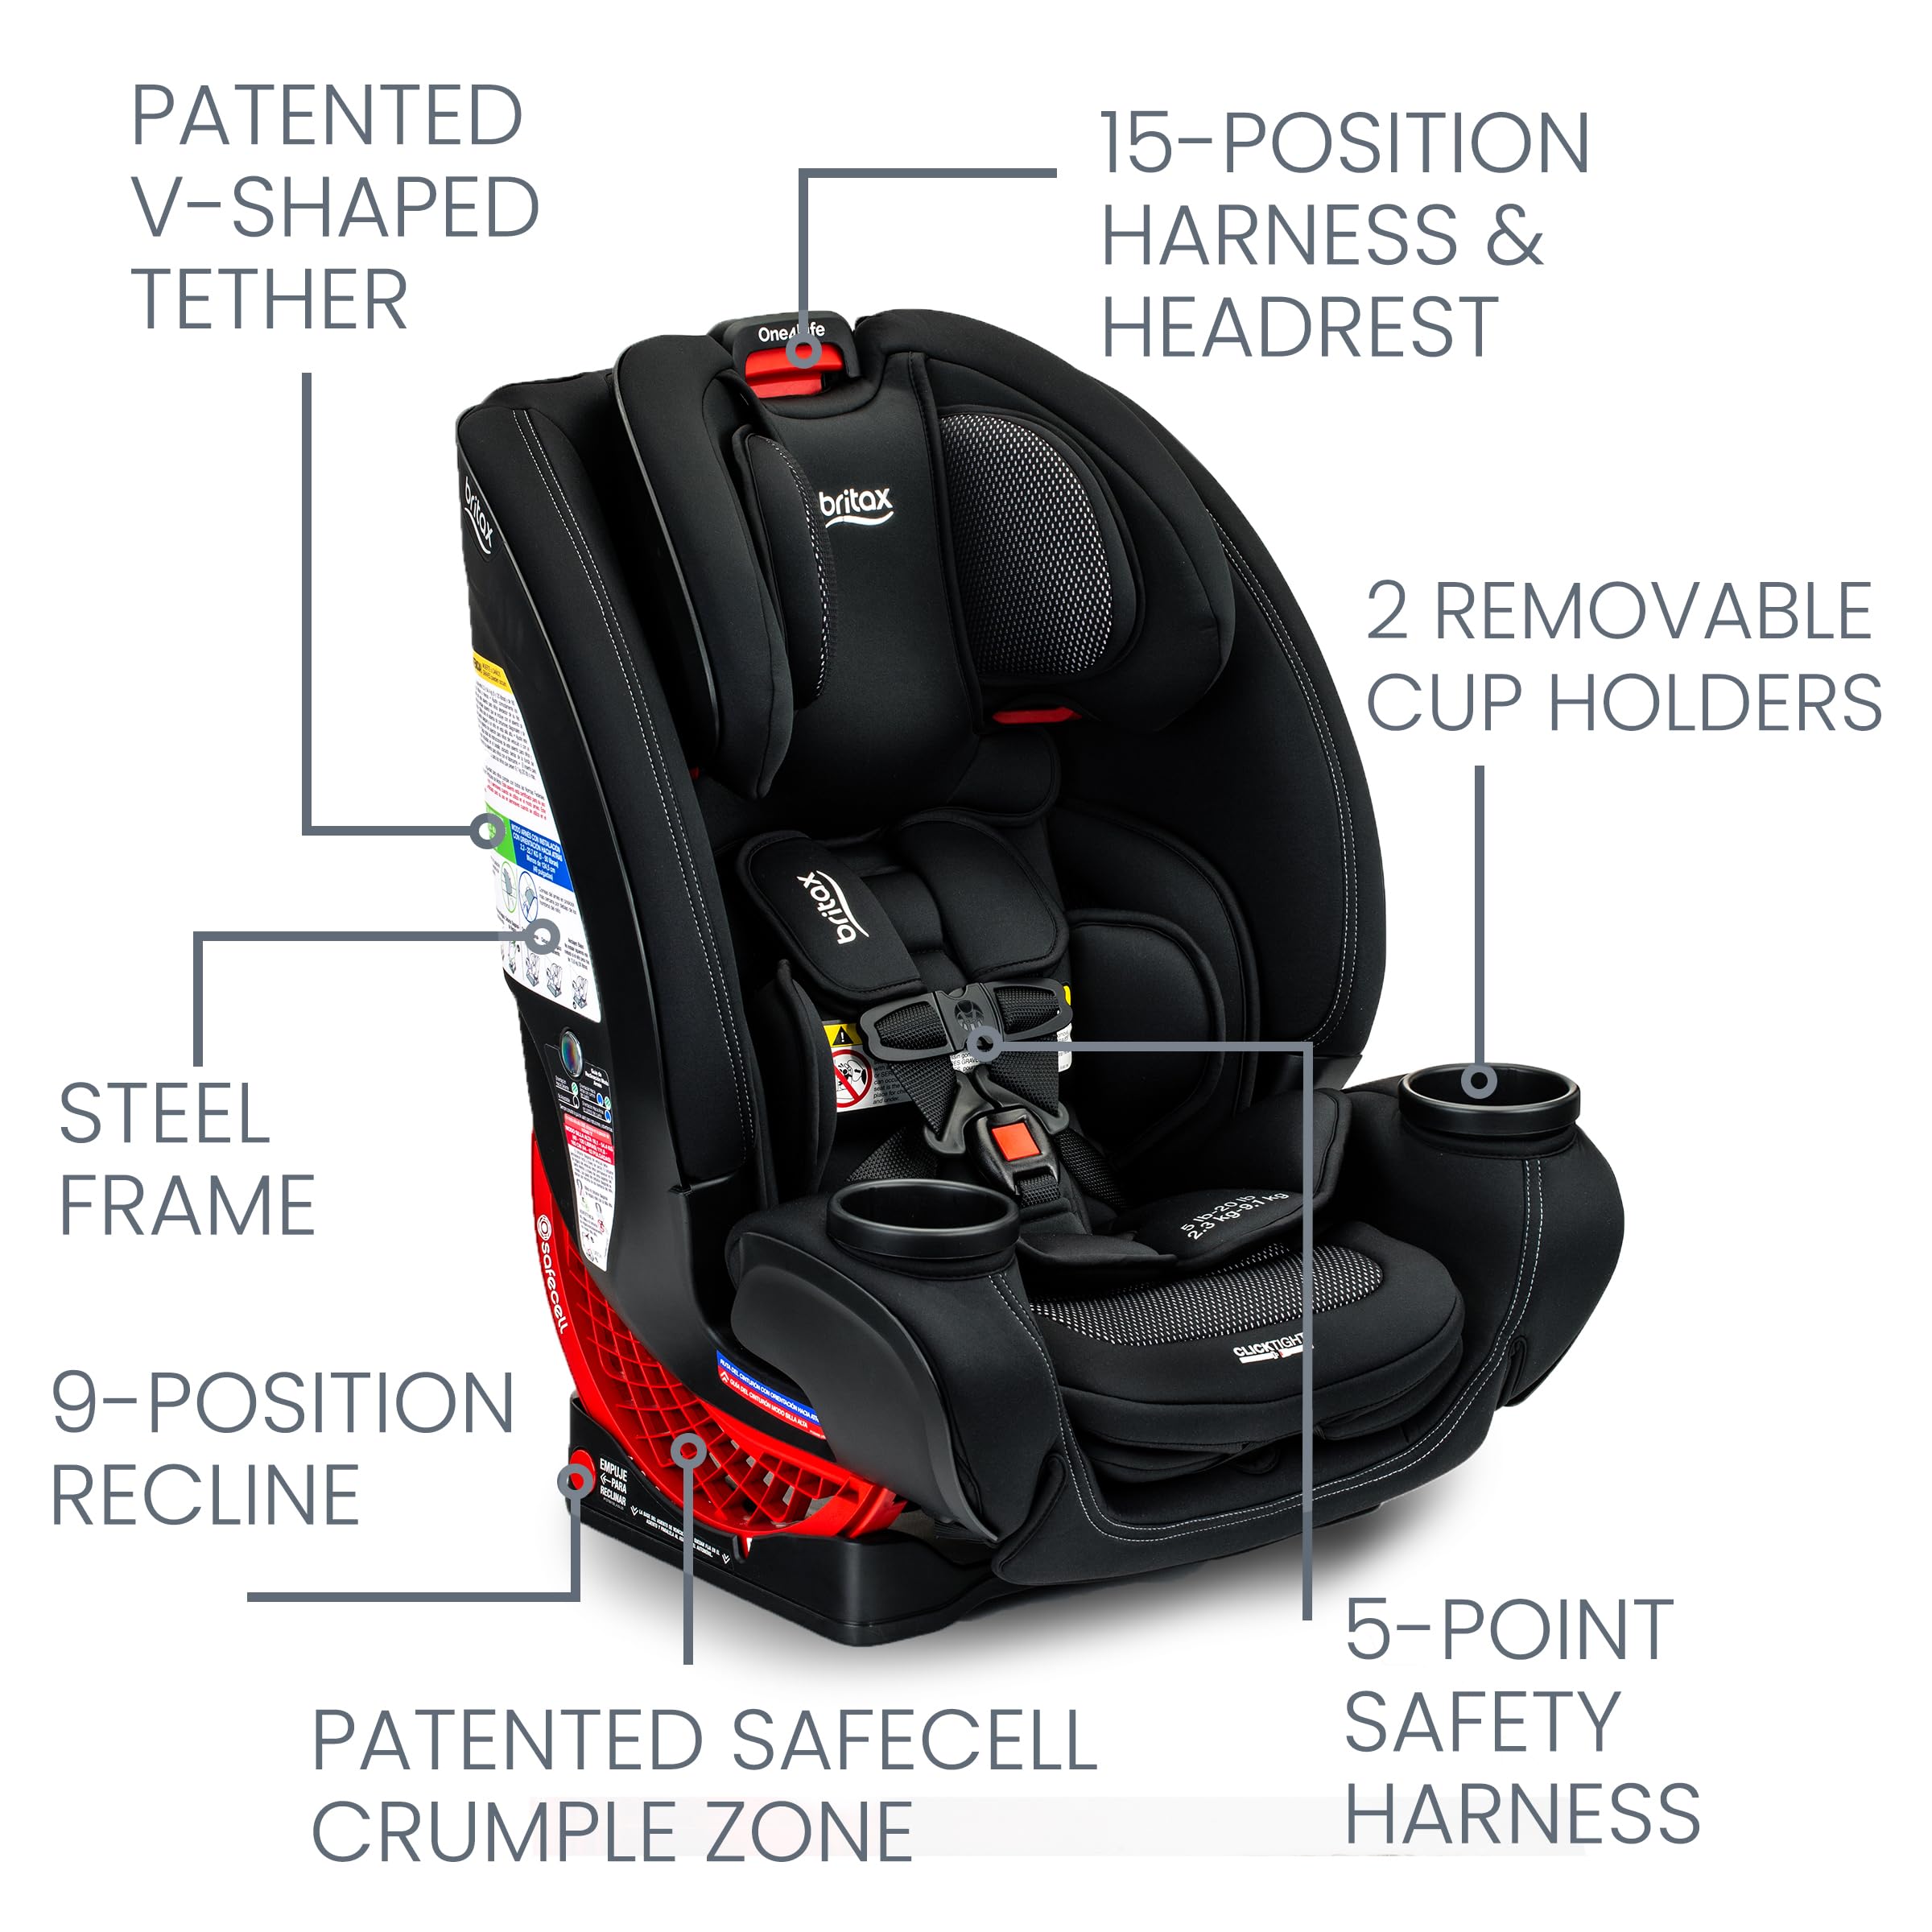 Britax One4Life Convertible Car Seat, 10 Years of Use from 5 to 120 Pounds, Converts from Rear-Facing Infant Car Seat to Forward-Facing Booster Seat, Performance Fabric, Cool Flow Carbon